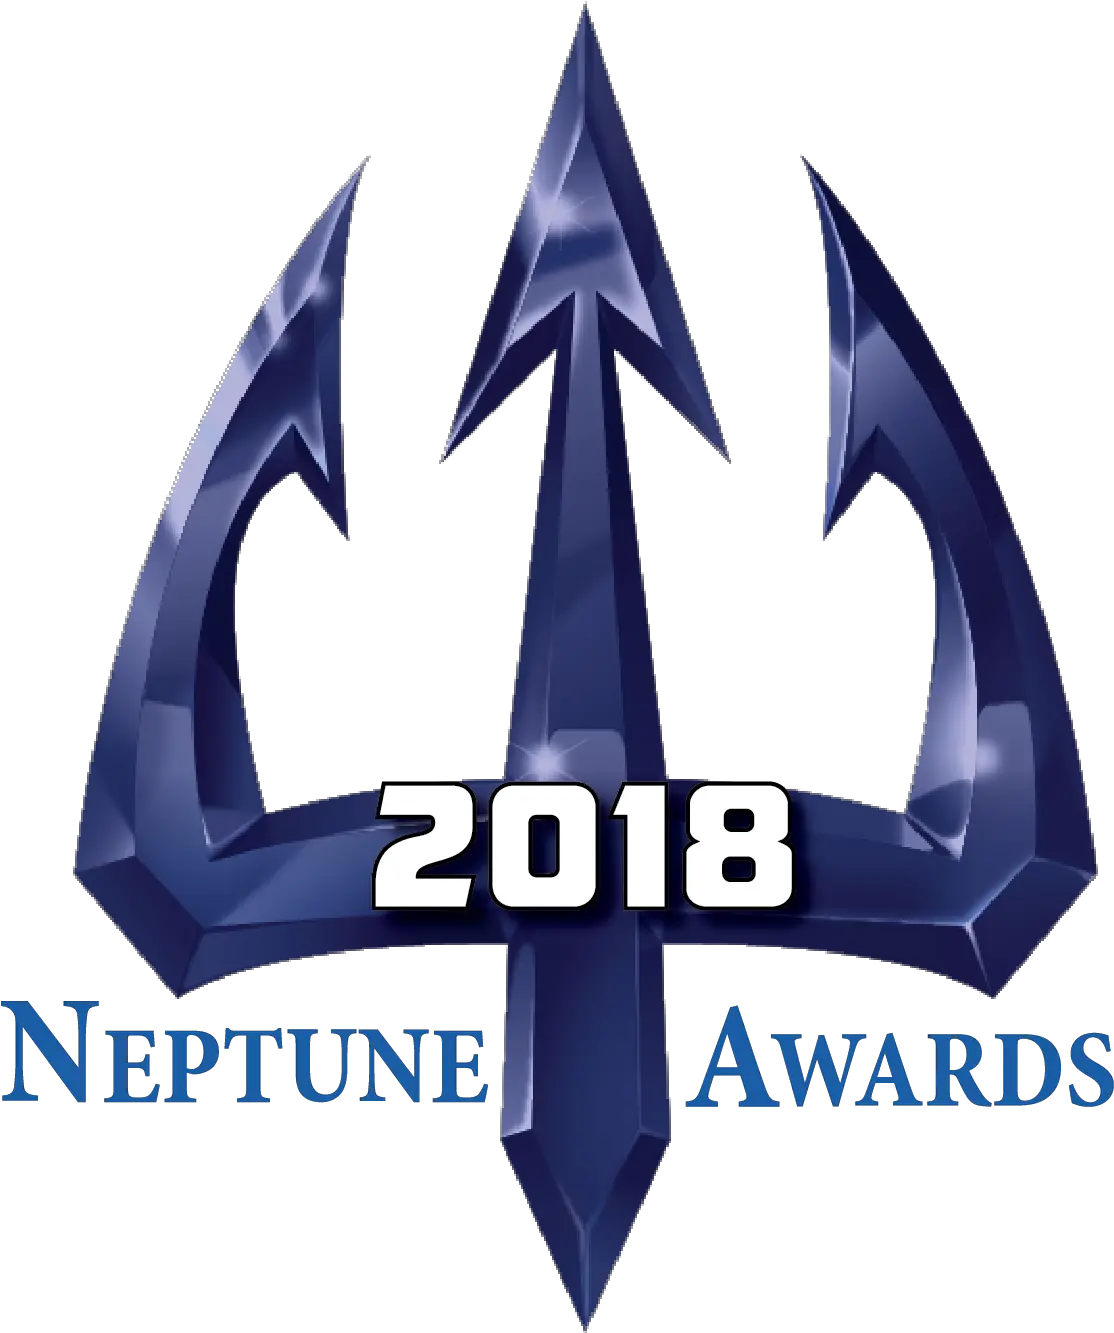 Download Trident Png Image With No Neptune Award 2019 Trident Png